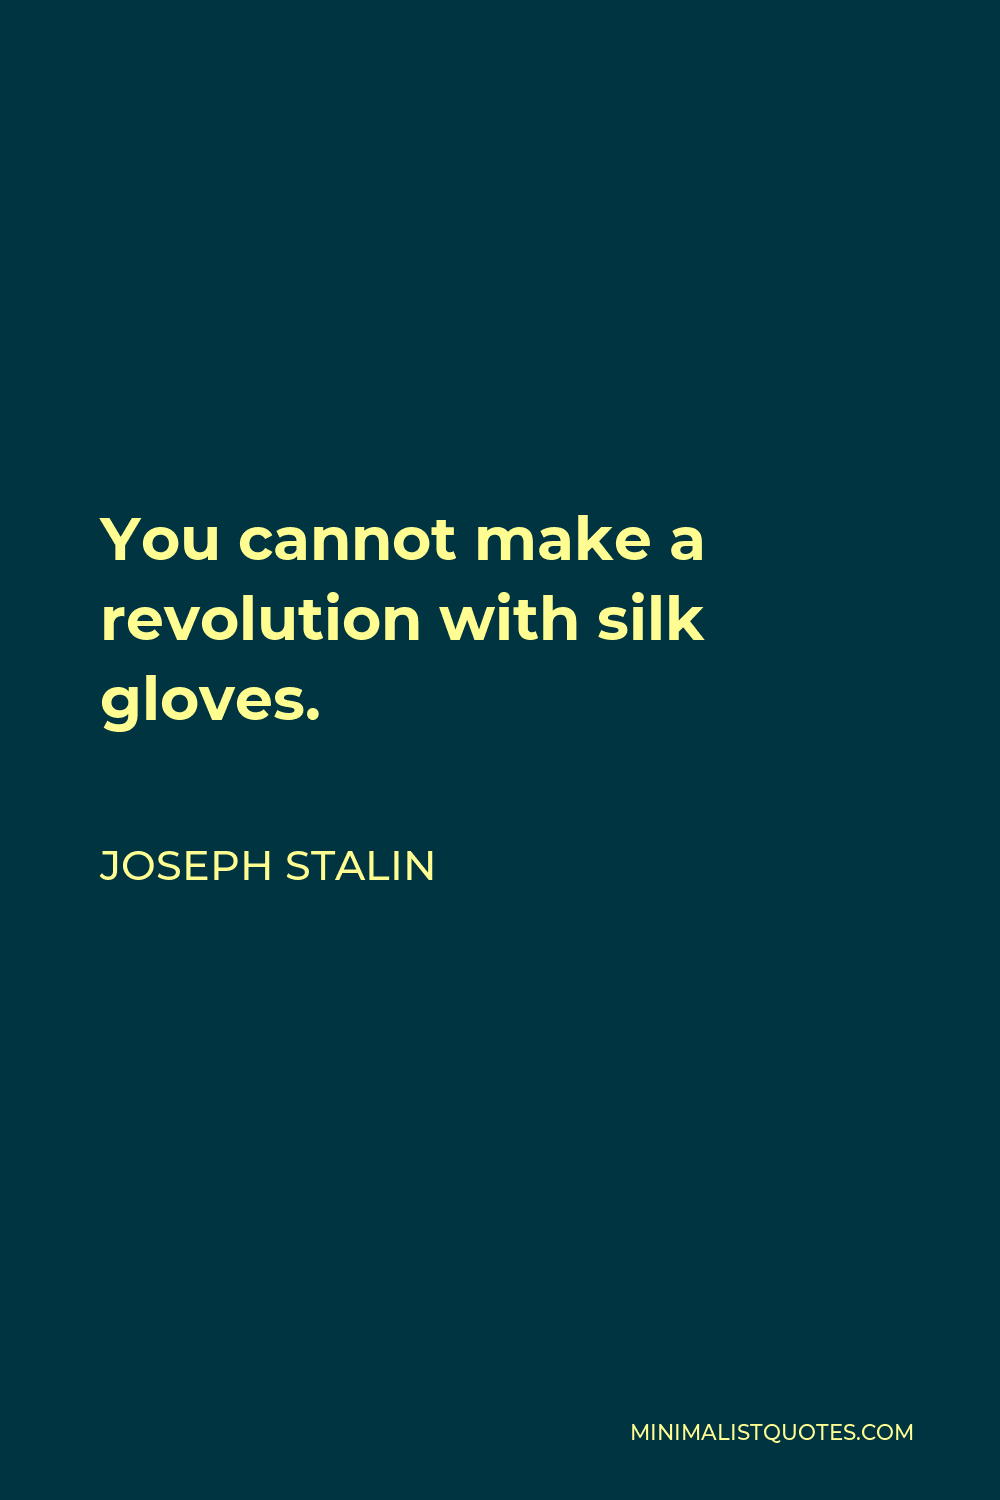 Joseph Stalin Quote - You cannot make a revolution with silk gloves.